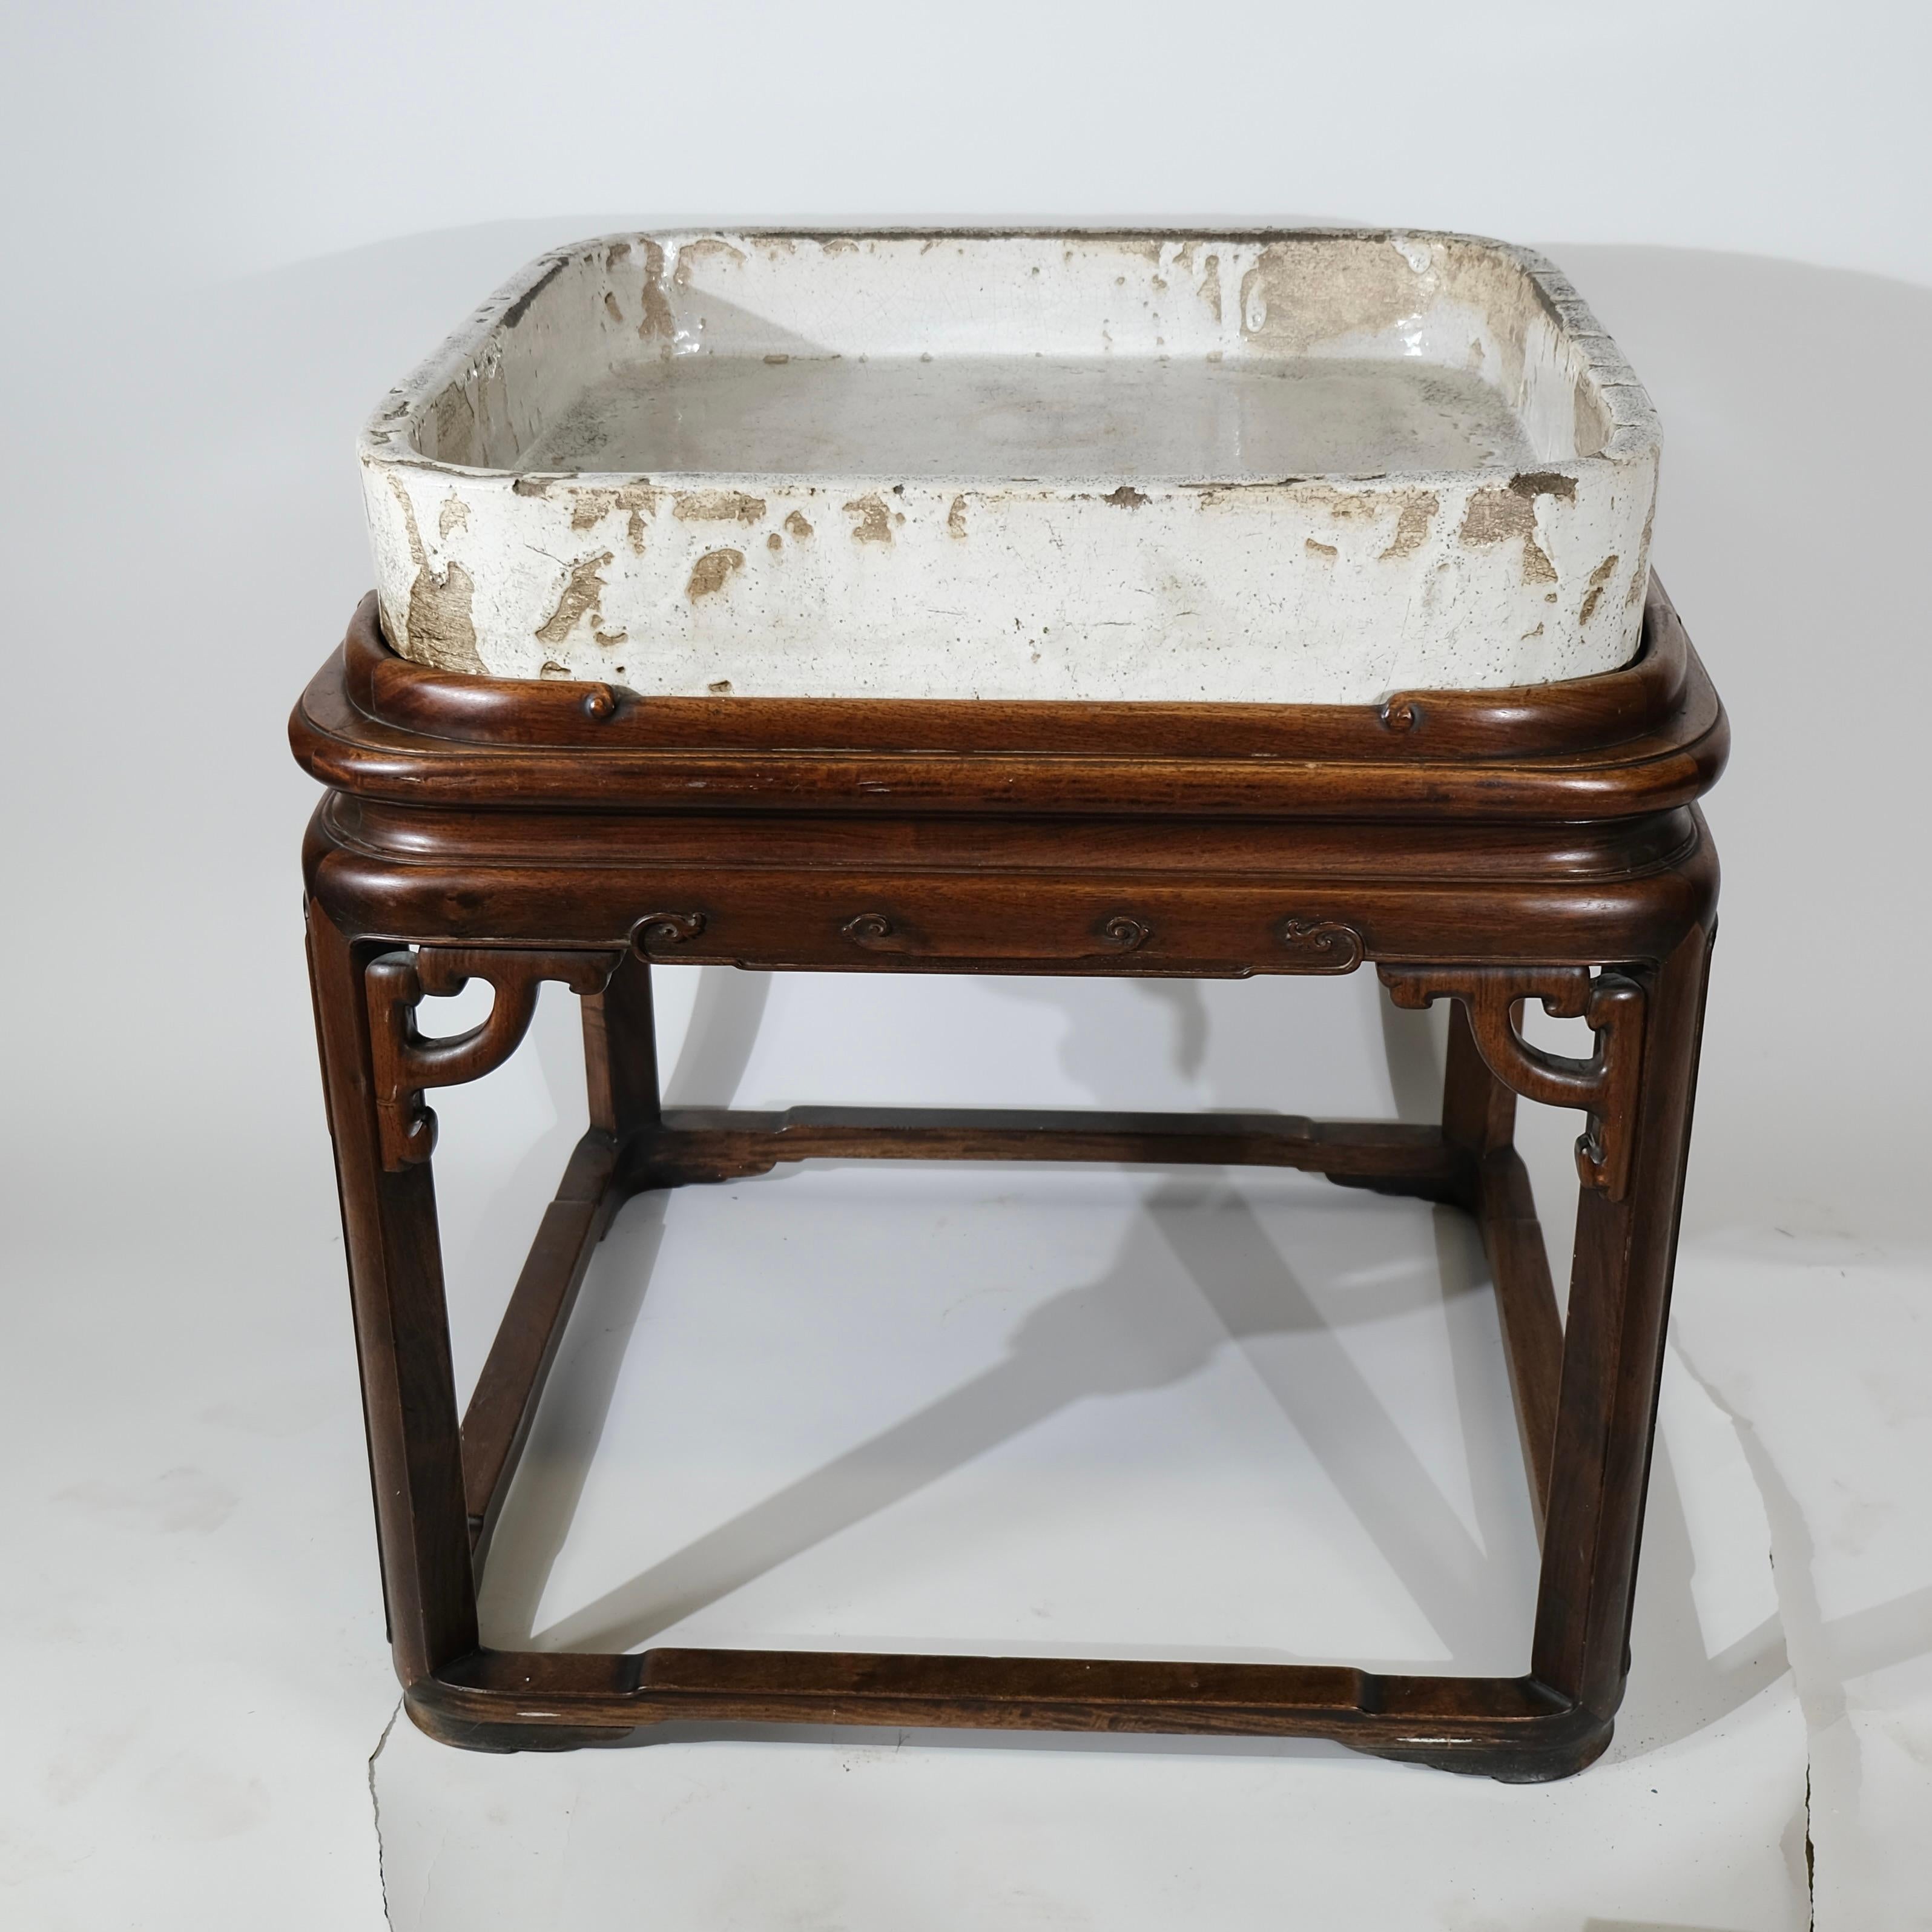 This rose wood table has a built-in basin specifically designed to house live fish. The glazed clay basin would serve as the fish tank, providing a safe and visually appealing environment for the fish. Normally Carp fish.

Alternatively, the table